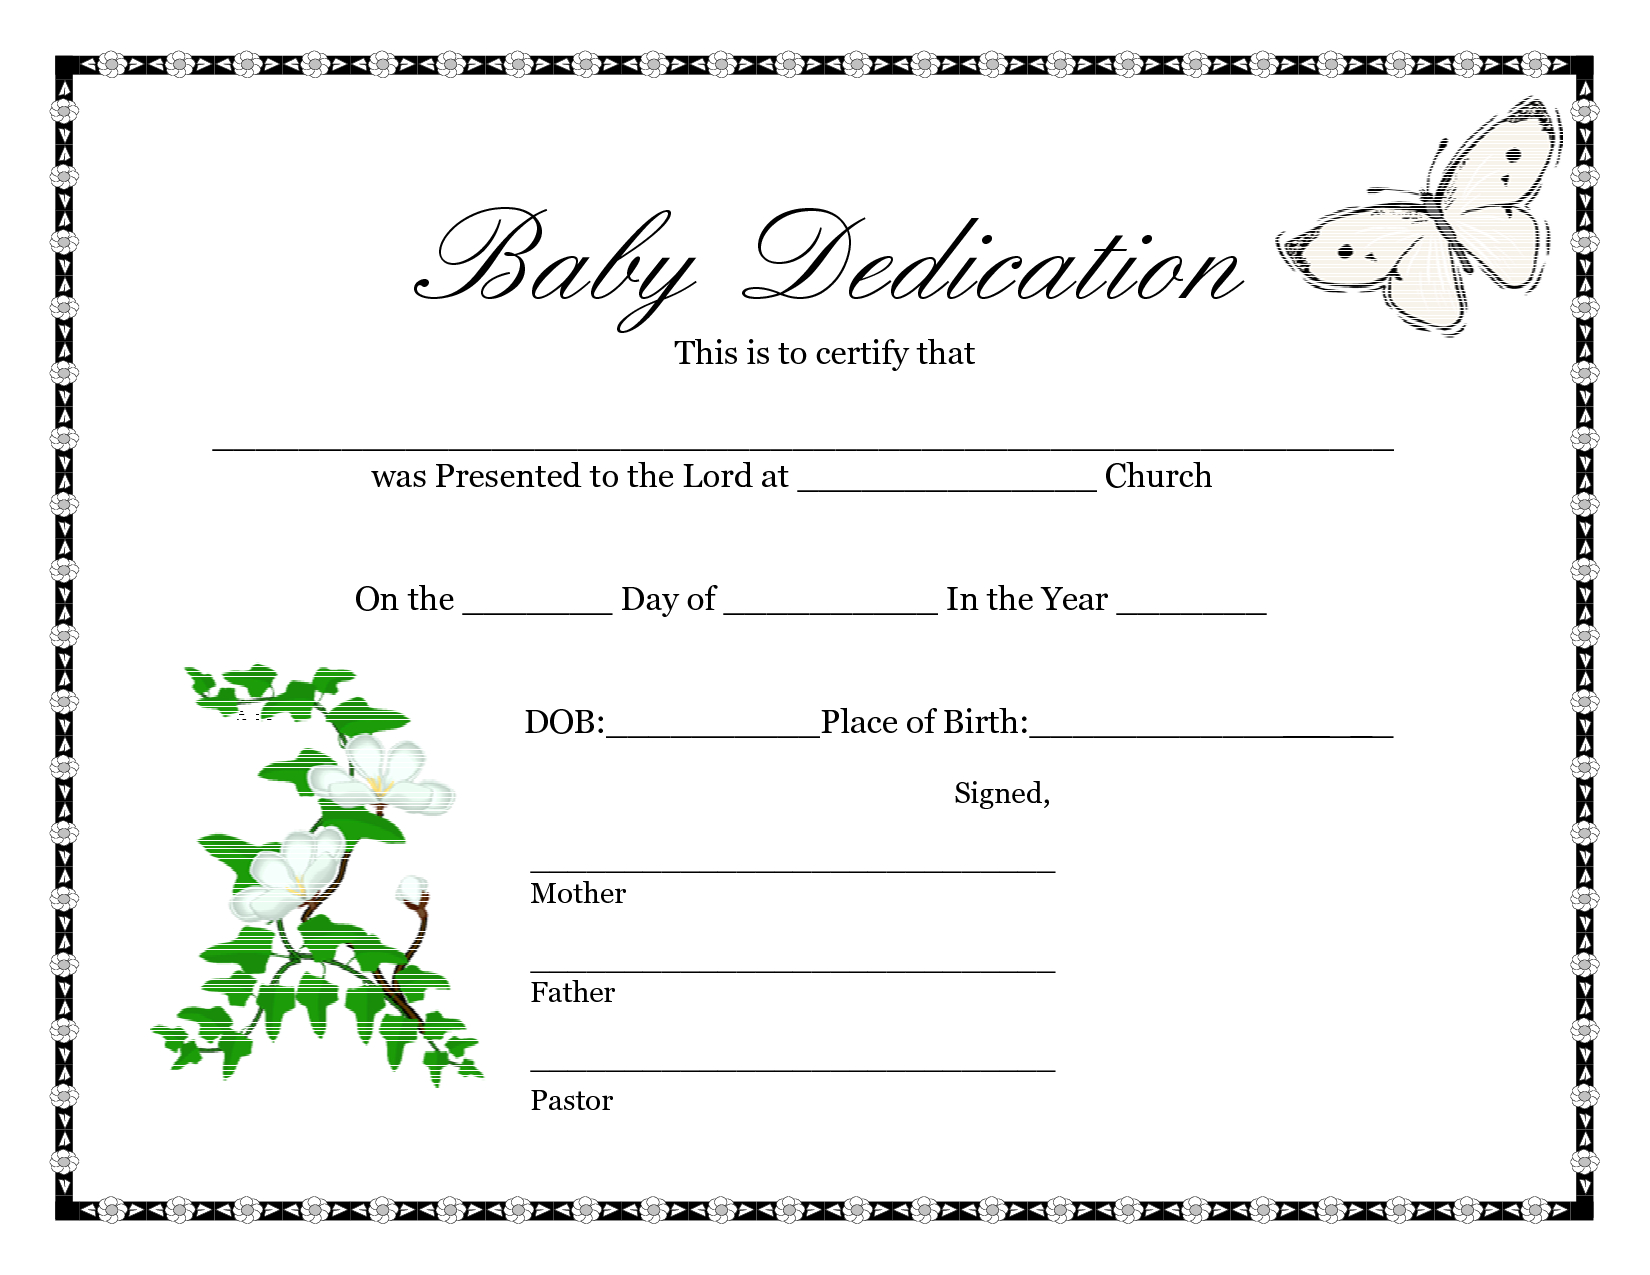 Downloadable Blank Birth Certificate Template Sample : V M D Intended For Birth Certificate Fake Template